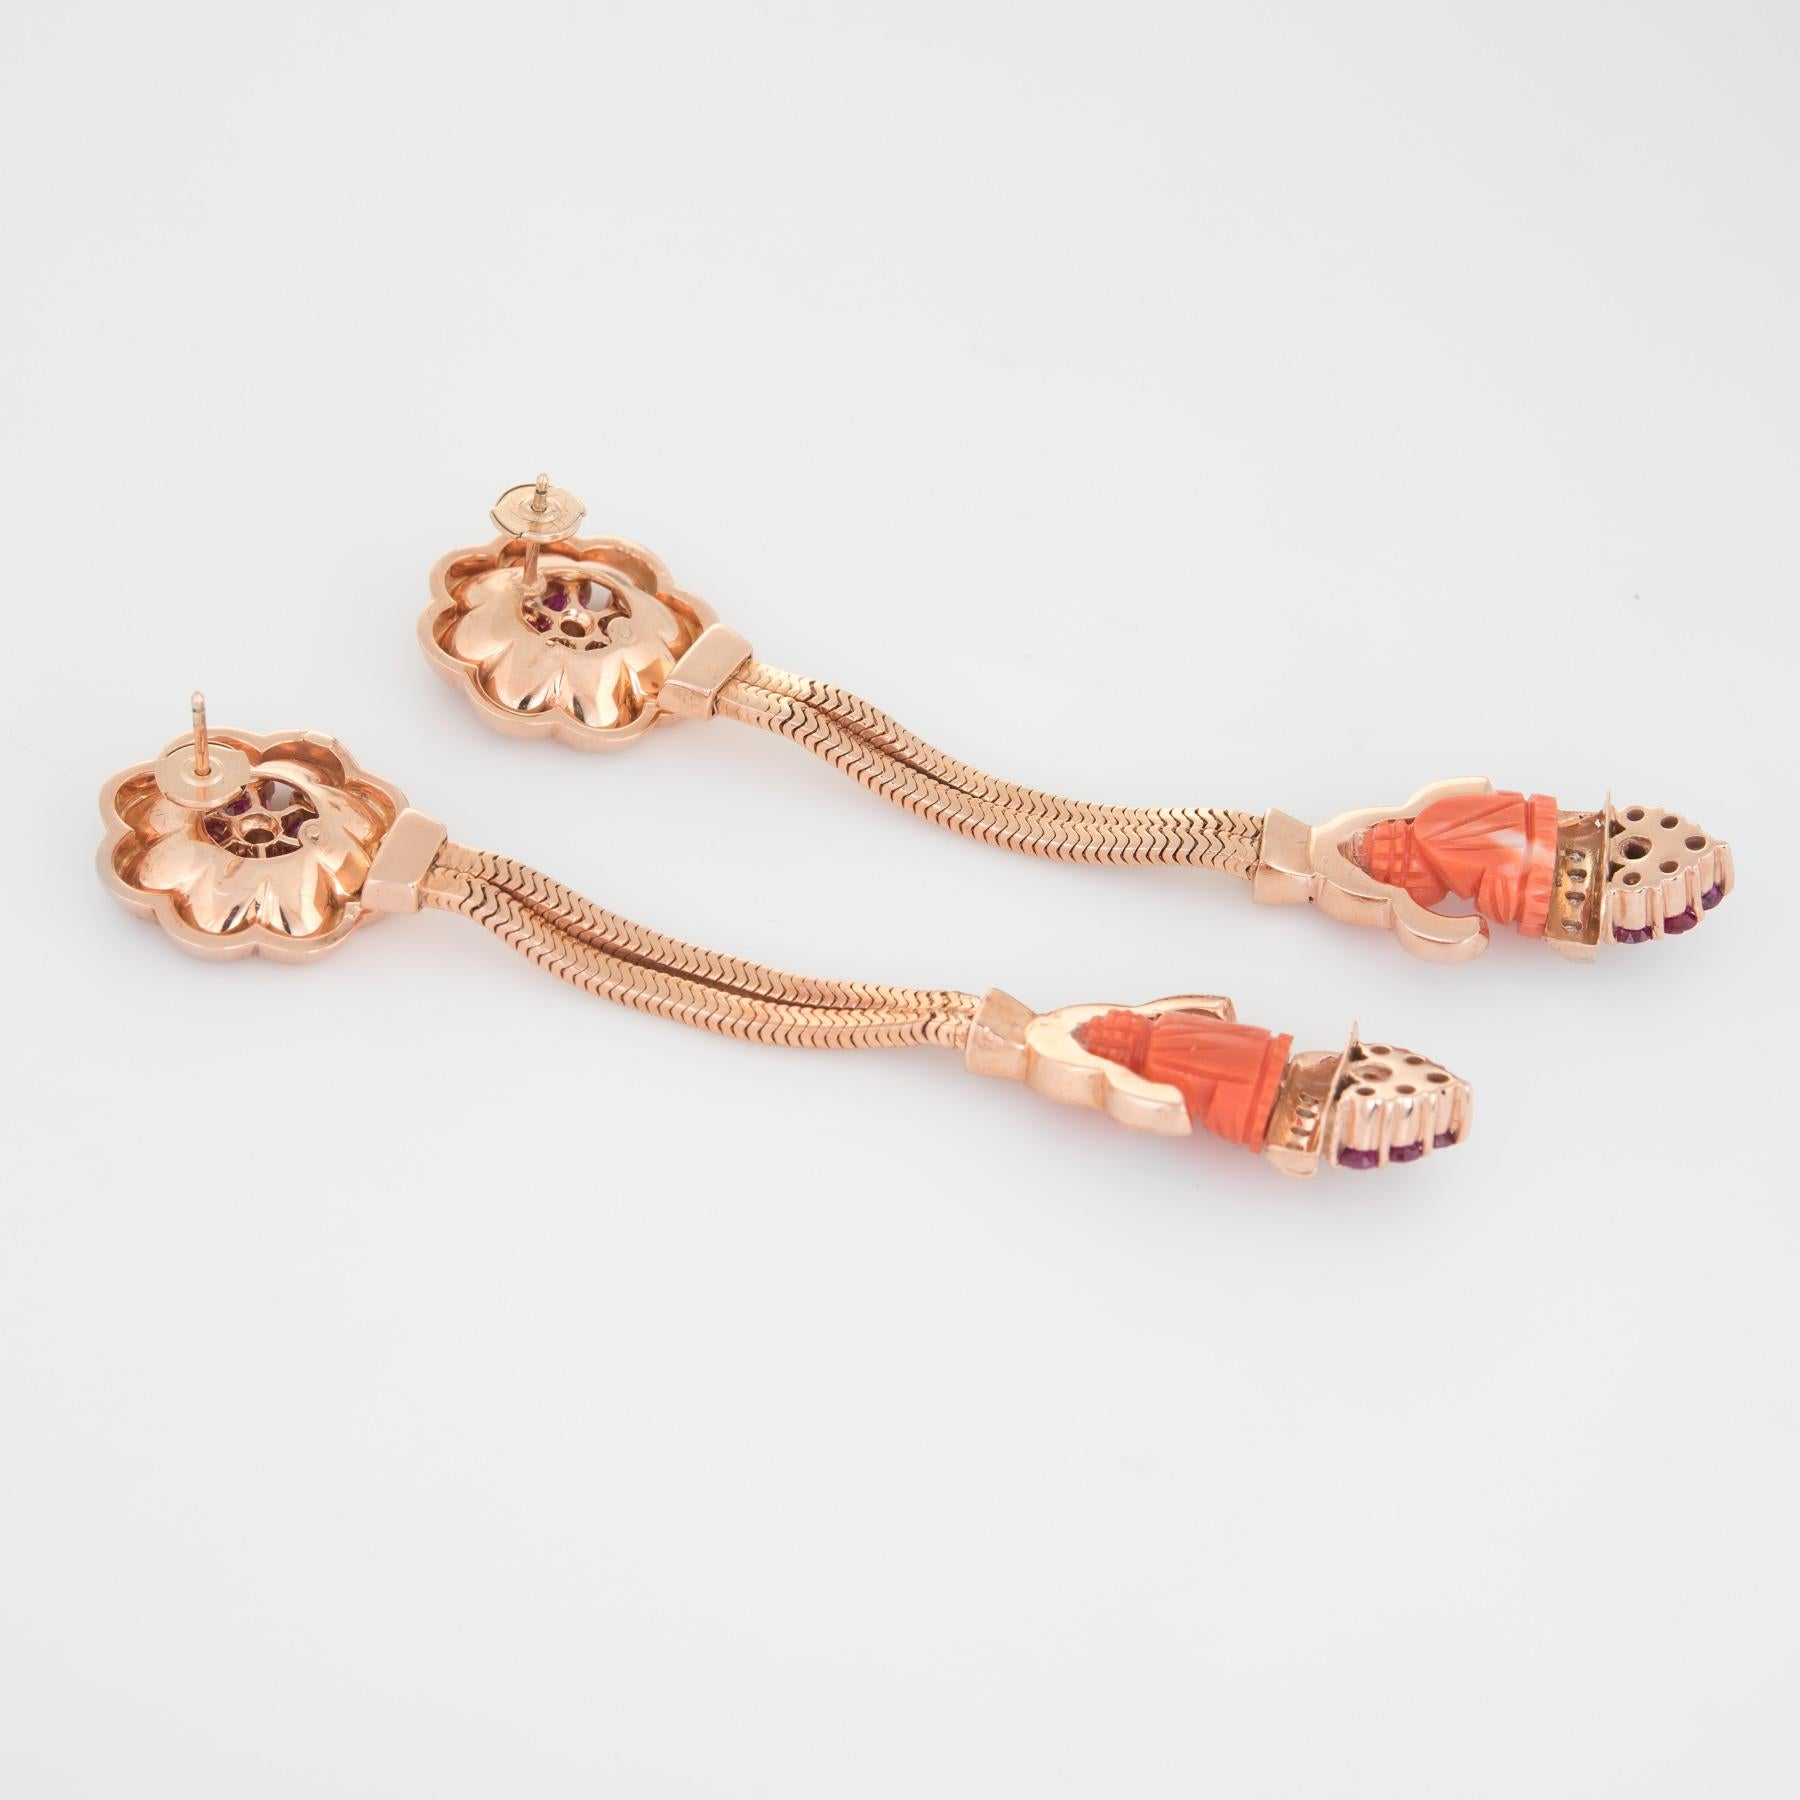 Fabulous pair of retro 1940s era coral Buddha earrings, crafted in 14k yellow gold. 

The coral is carved in the form of a sitting Buddha measuring 13mm x 10mm. The rubies total an estimated 2 carats. The diamond total weight is estimated at 0.30